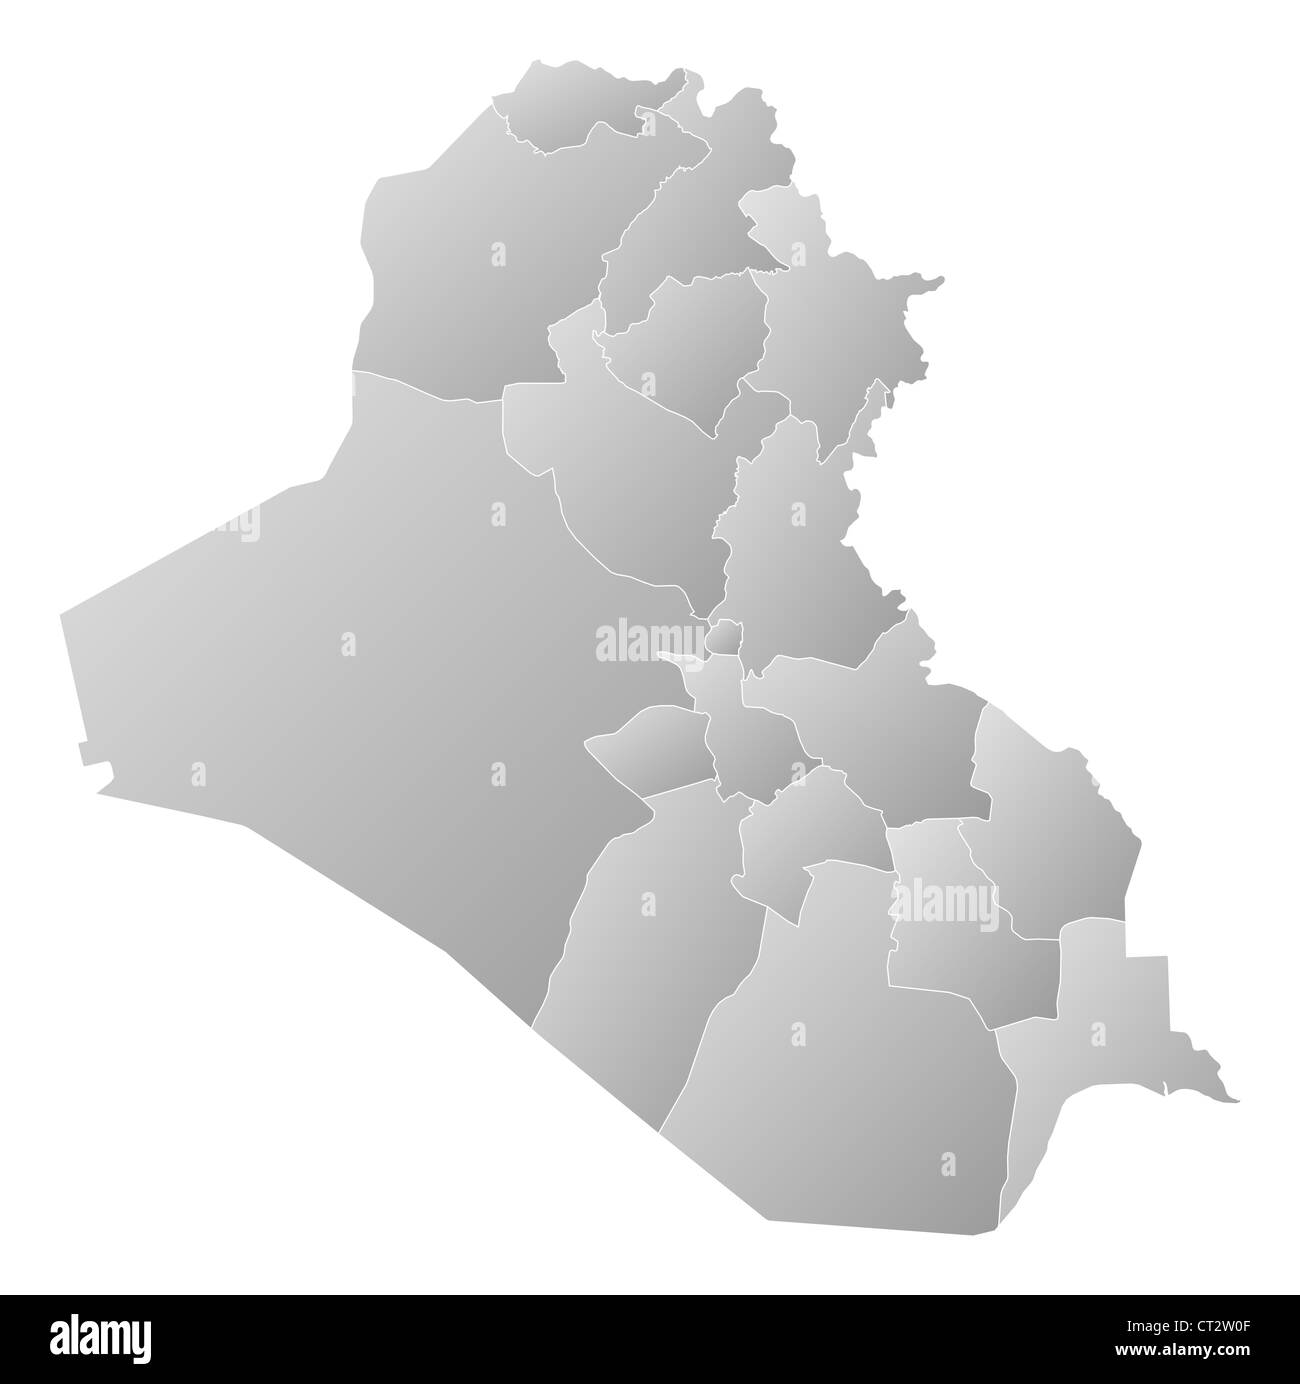 Political map of Iraq with the several governorates. Stock Photo